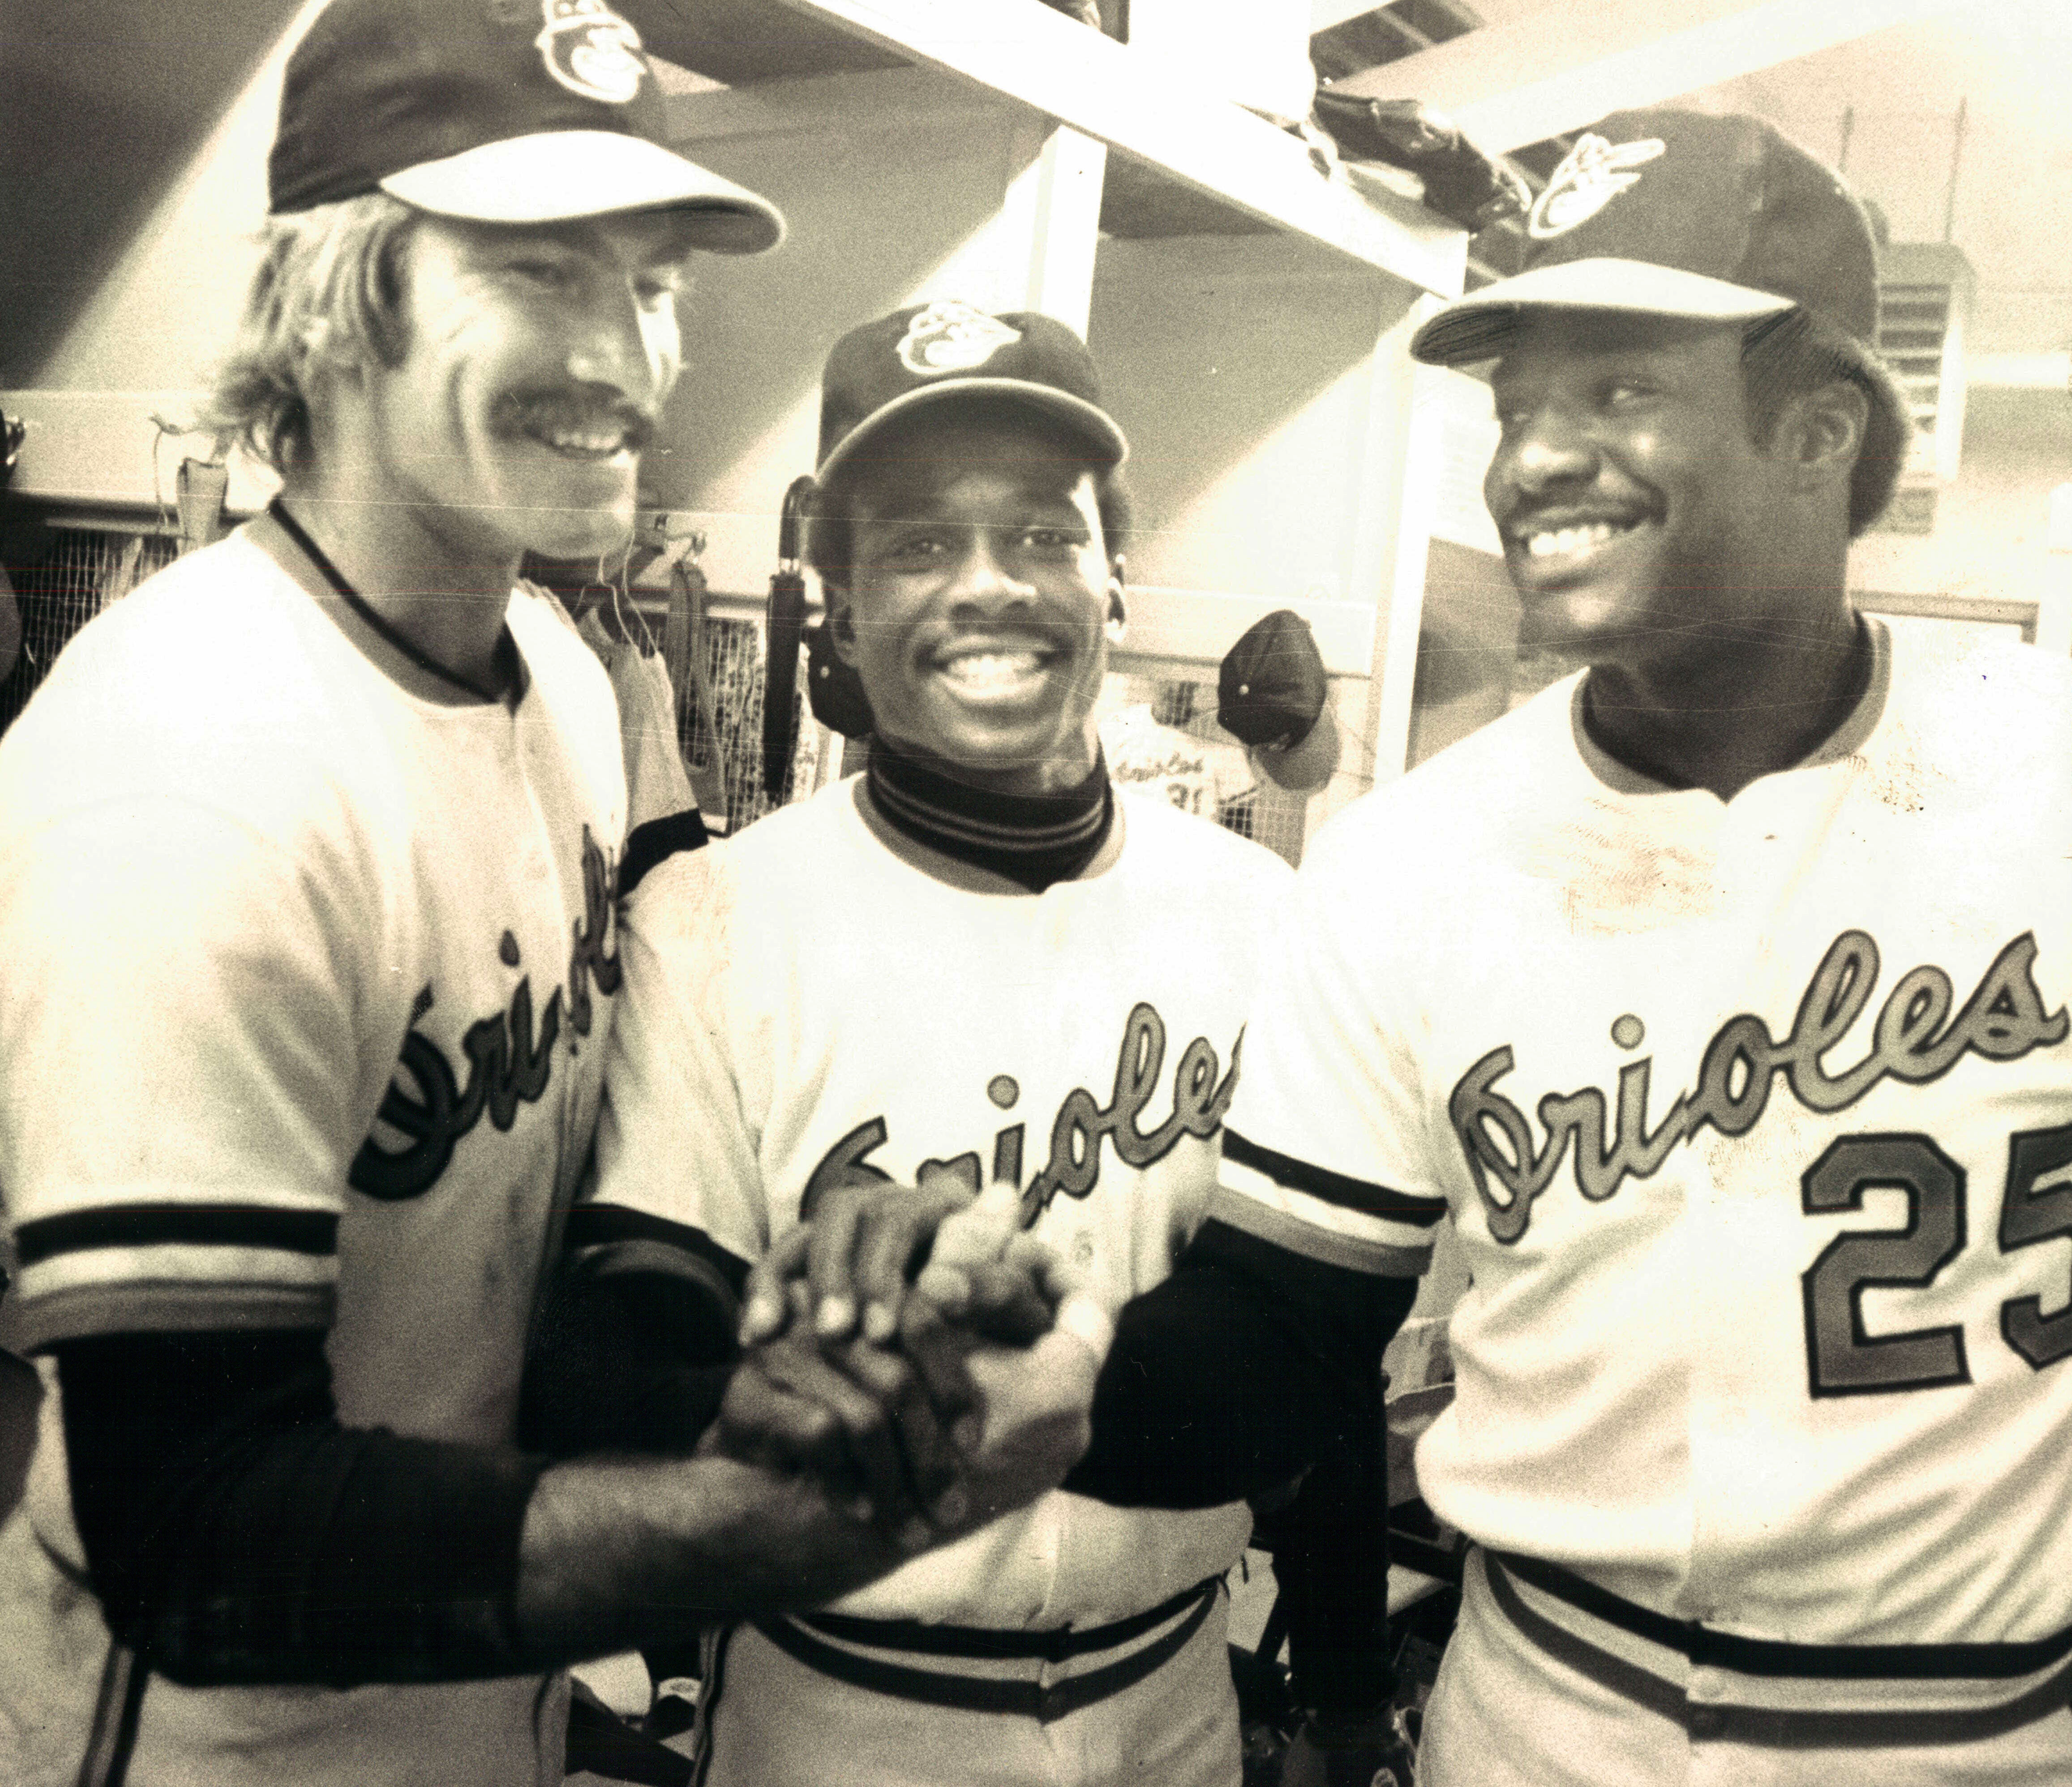 Al Bumbry, center, with Bobby Grich, left, and Don Baylor in 1974. (Staff Photo)